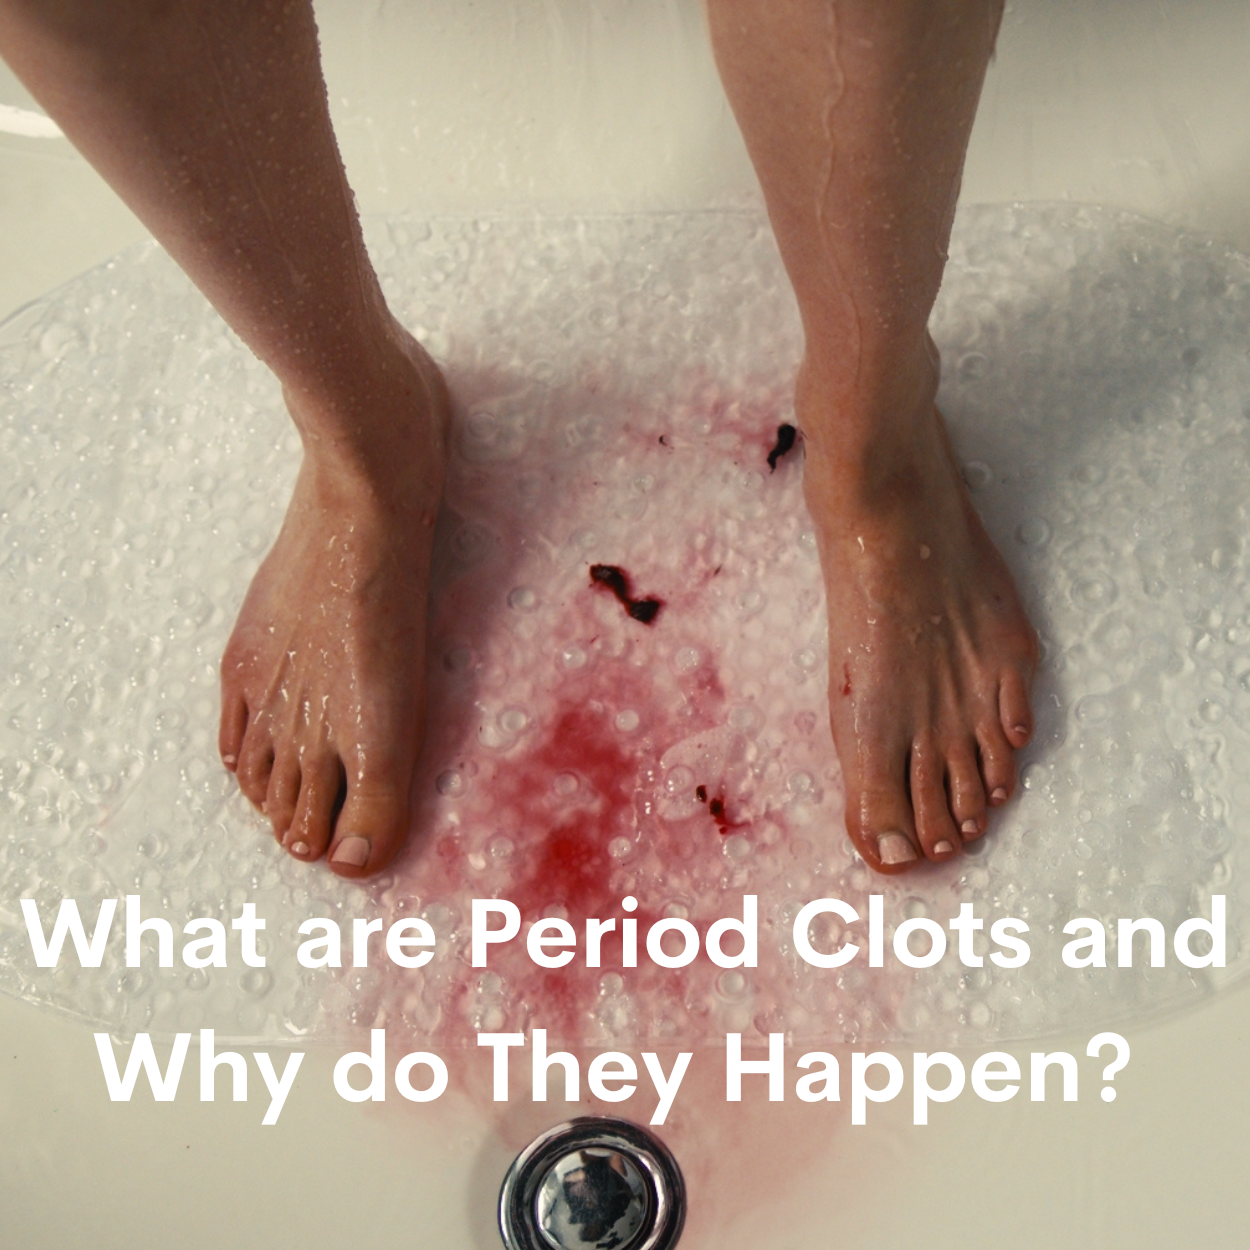 What are the reasons for having stringy period blood? - Quora